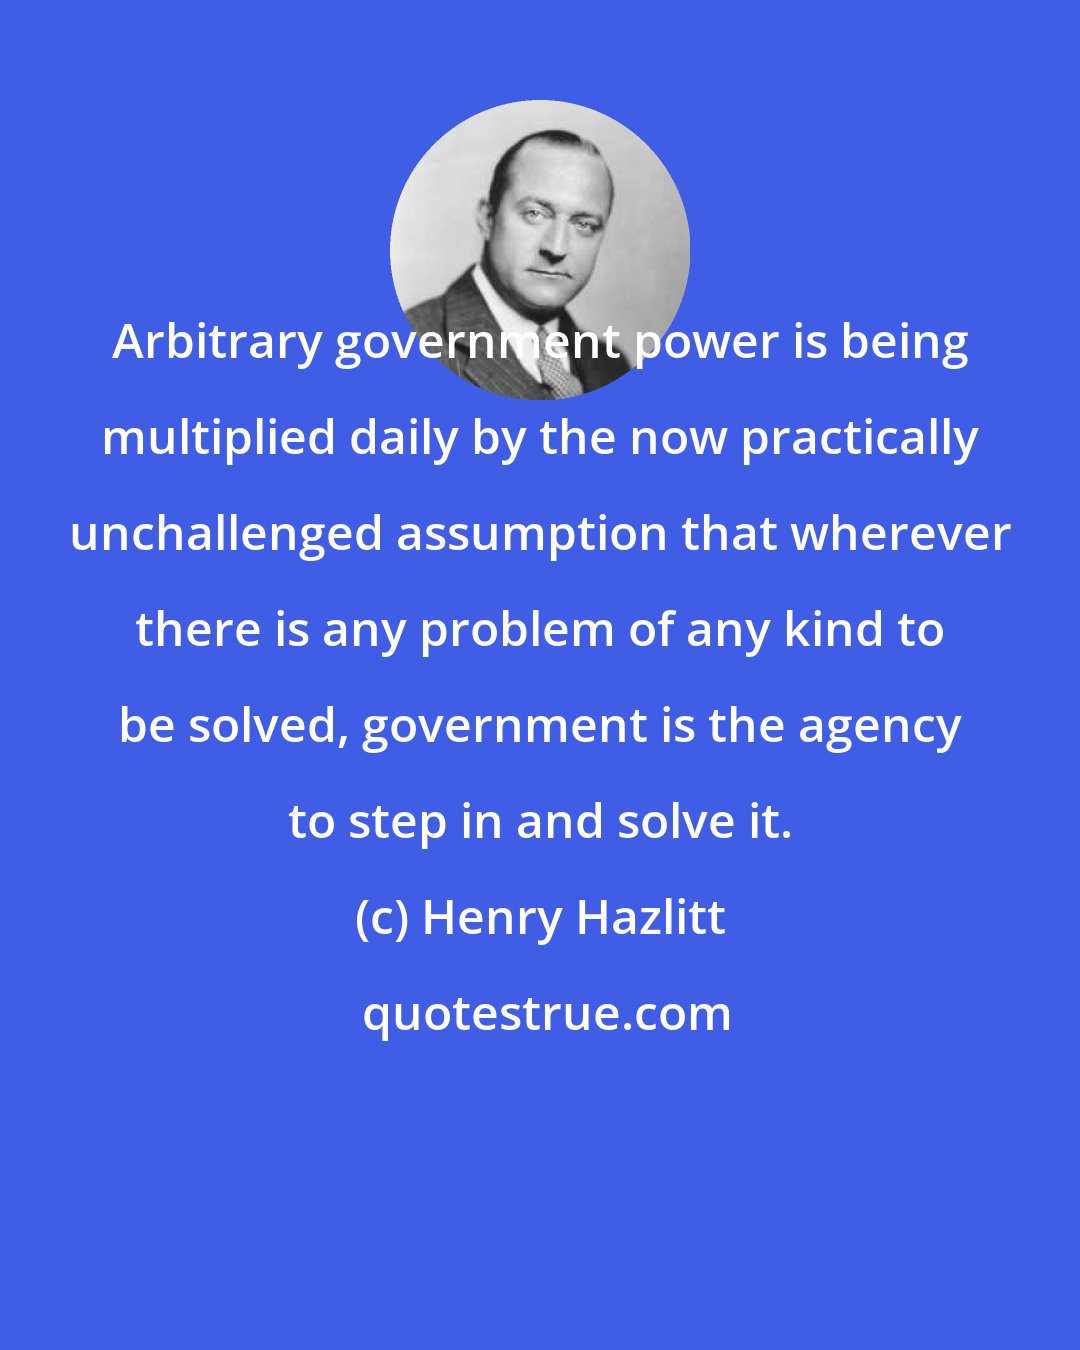 Henry Hazlitt: Arbitrary government power is being multiplied daily by the now practically unchallenged assumption that wherever there is any problem of any kind to be solved, government is the agency to step in and solve it.